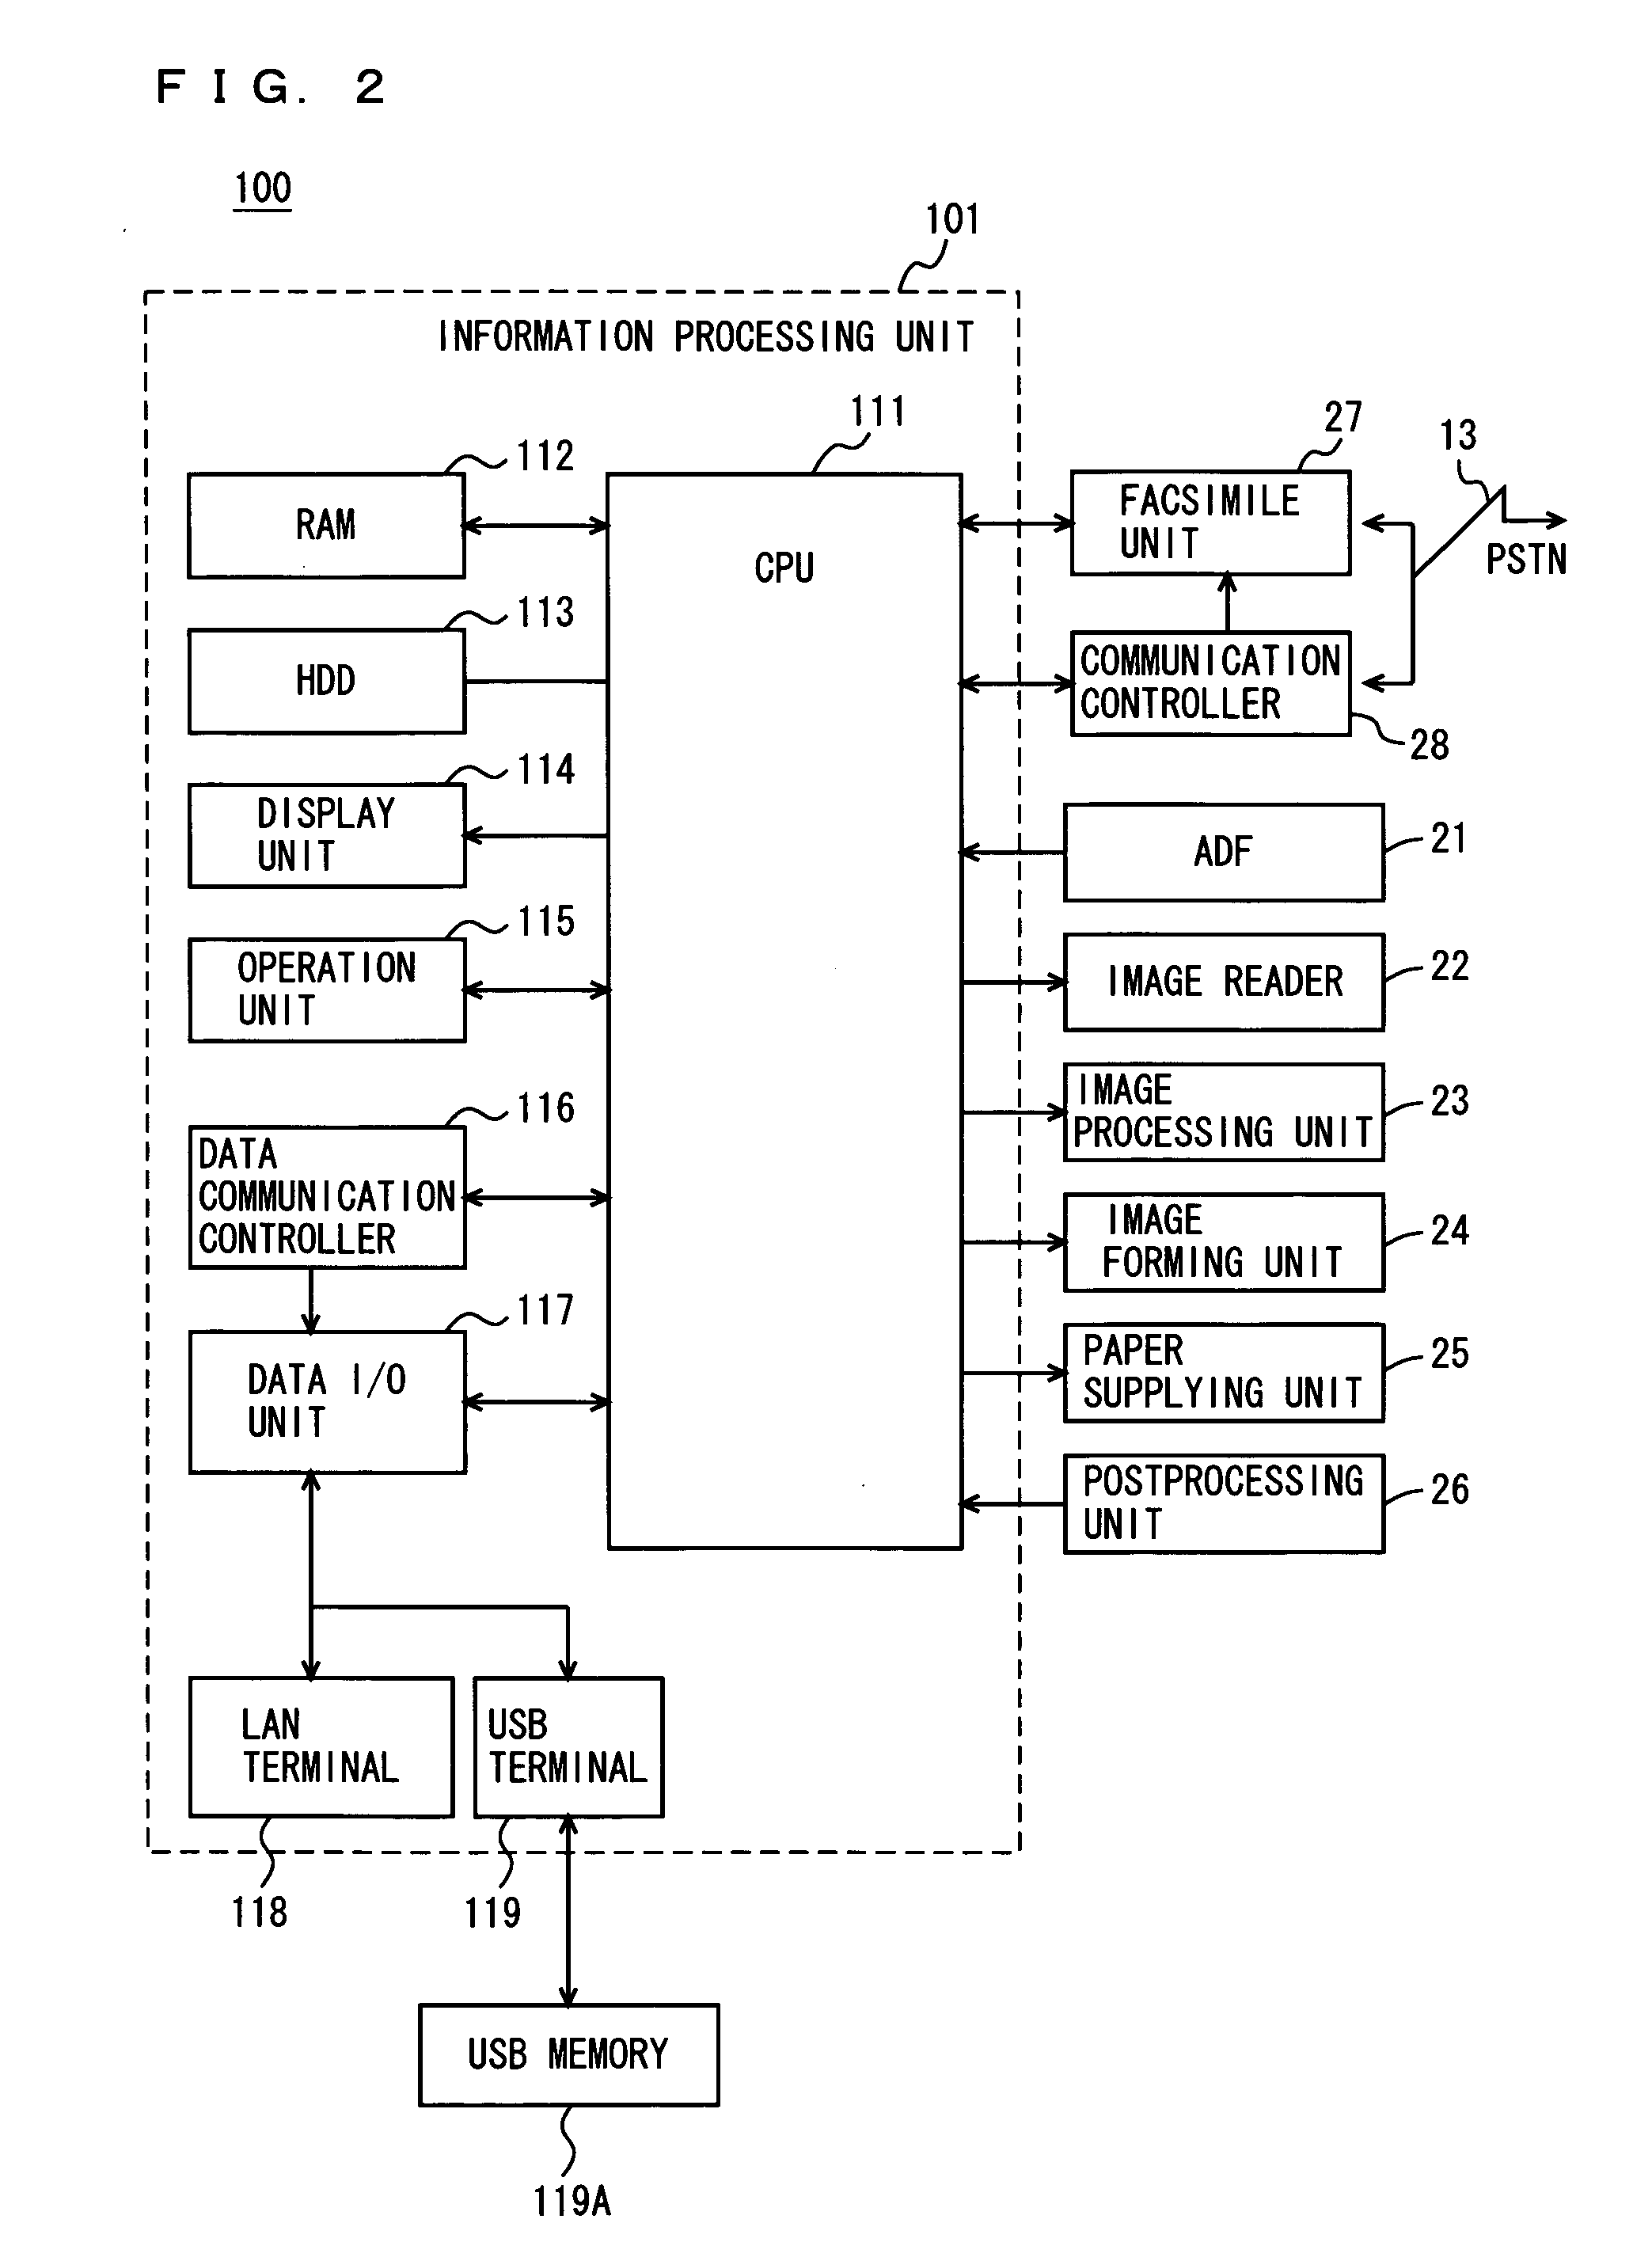 Image forming apparatus suitable for recycling sheets of paper with images formed thereon, and method and program product for adding recycling information